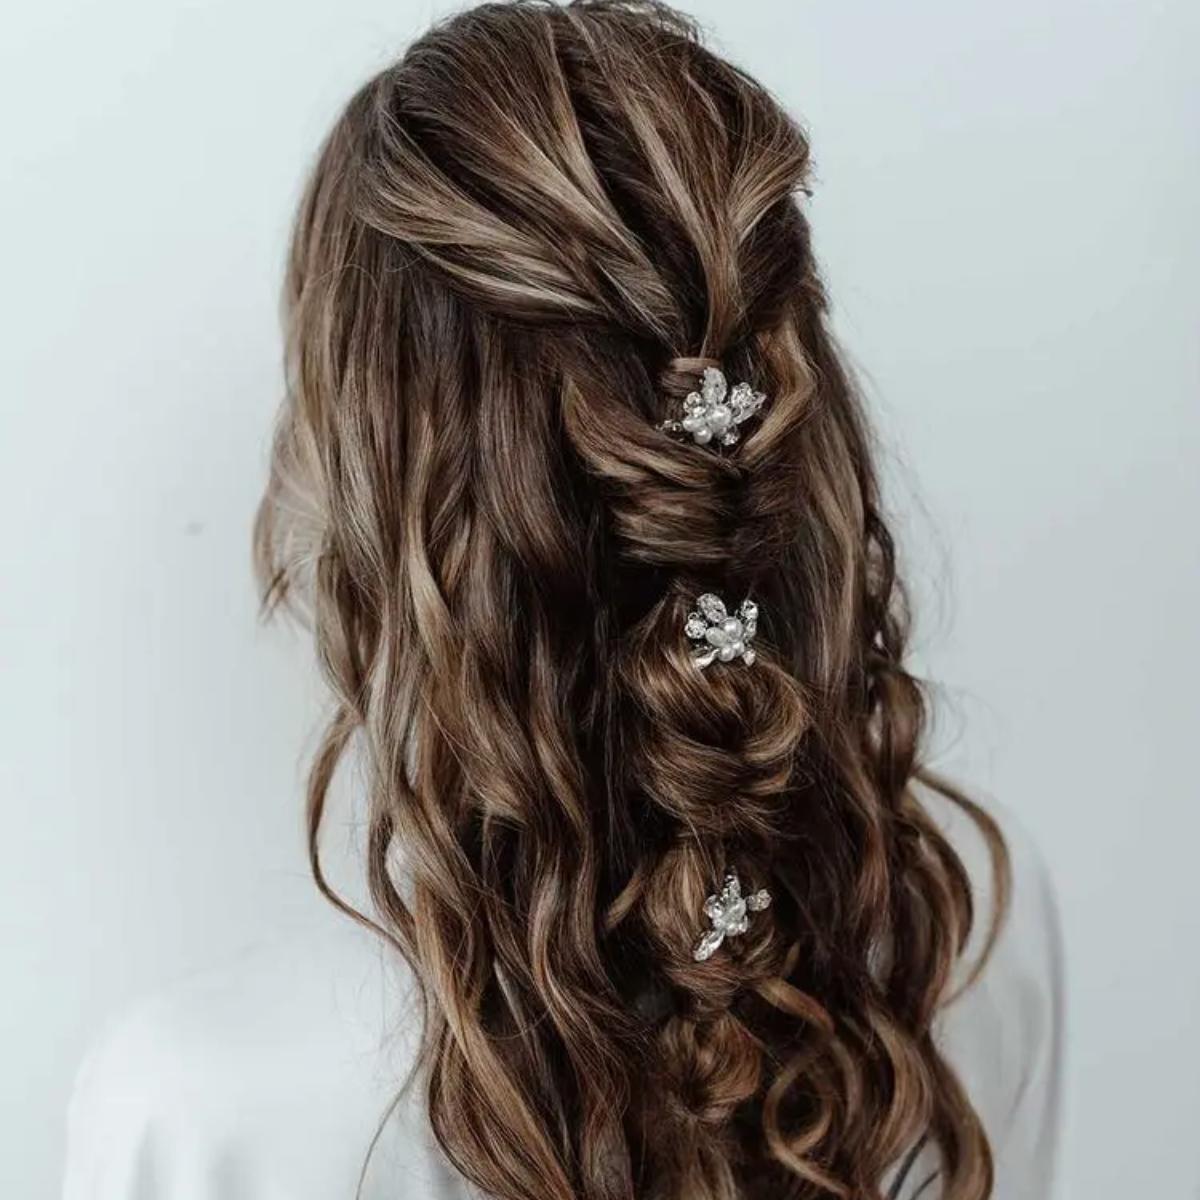 Top Bridal Hairstyles: Perfect Looks For Your Wedding Day - HubPages